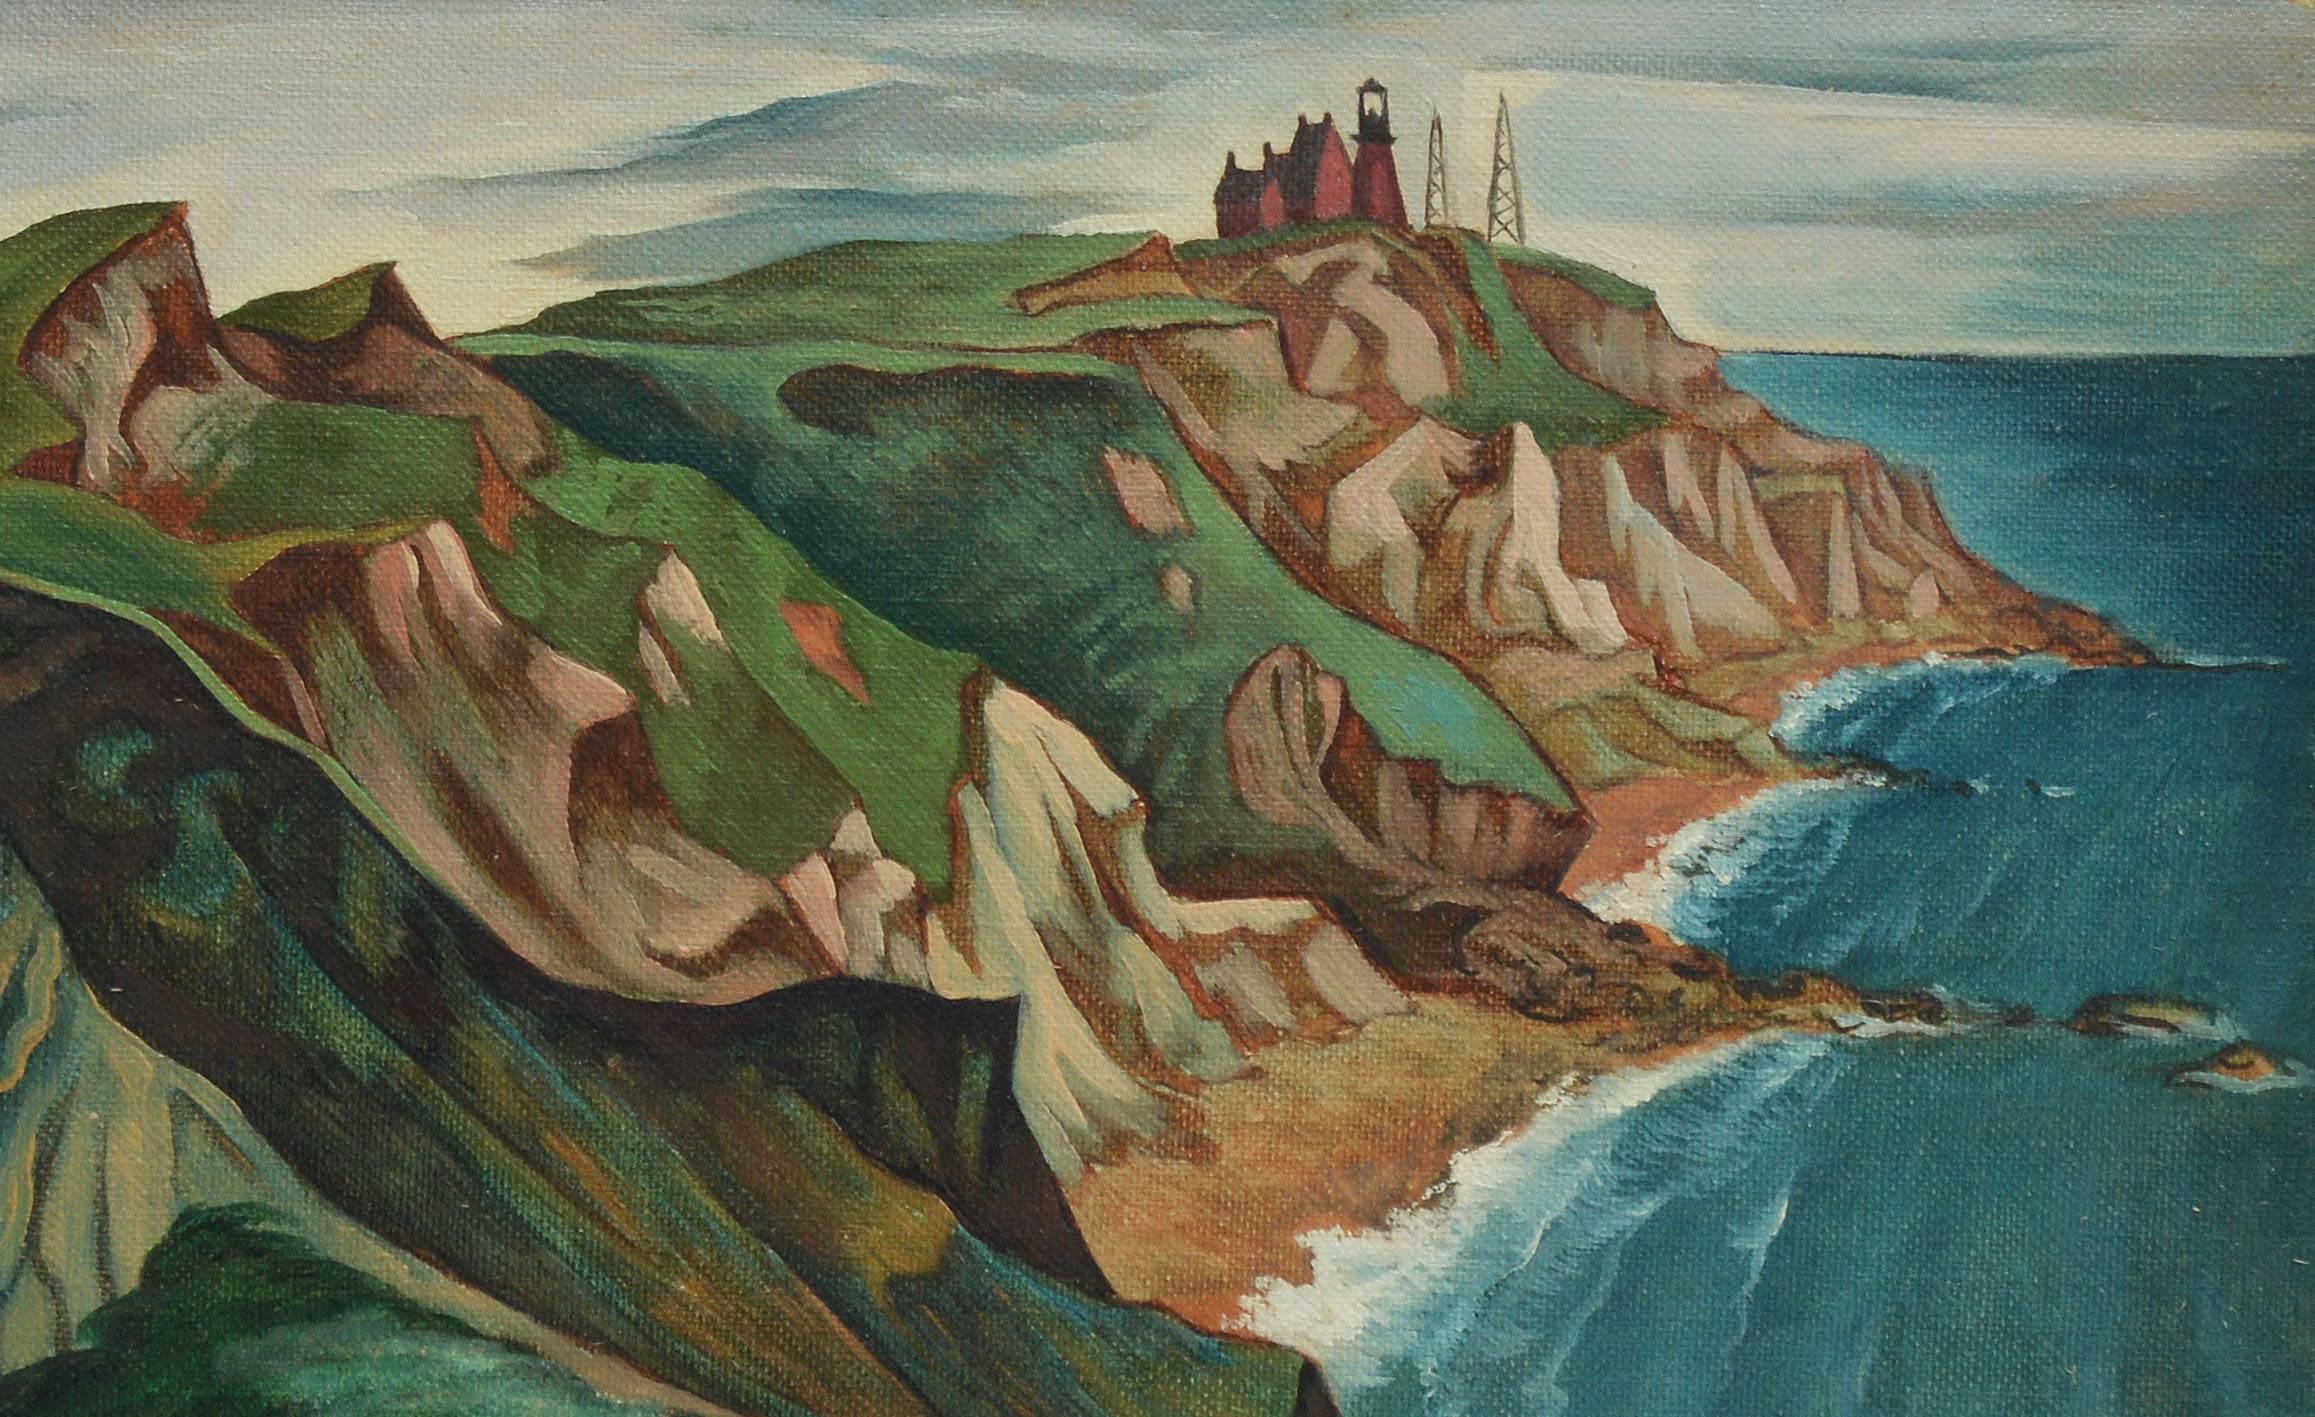 Modernist landscape view of Block Island by Francis Colburn  (1909 - 1984).  Oil on board, circa 1940.  Signed lower left.  Displayed in a giltwood frame.  Image size, 13